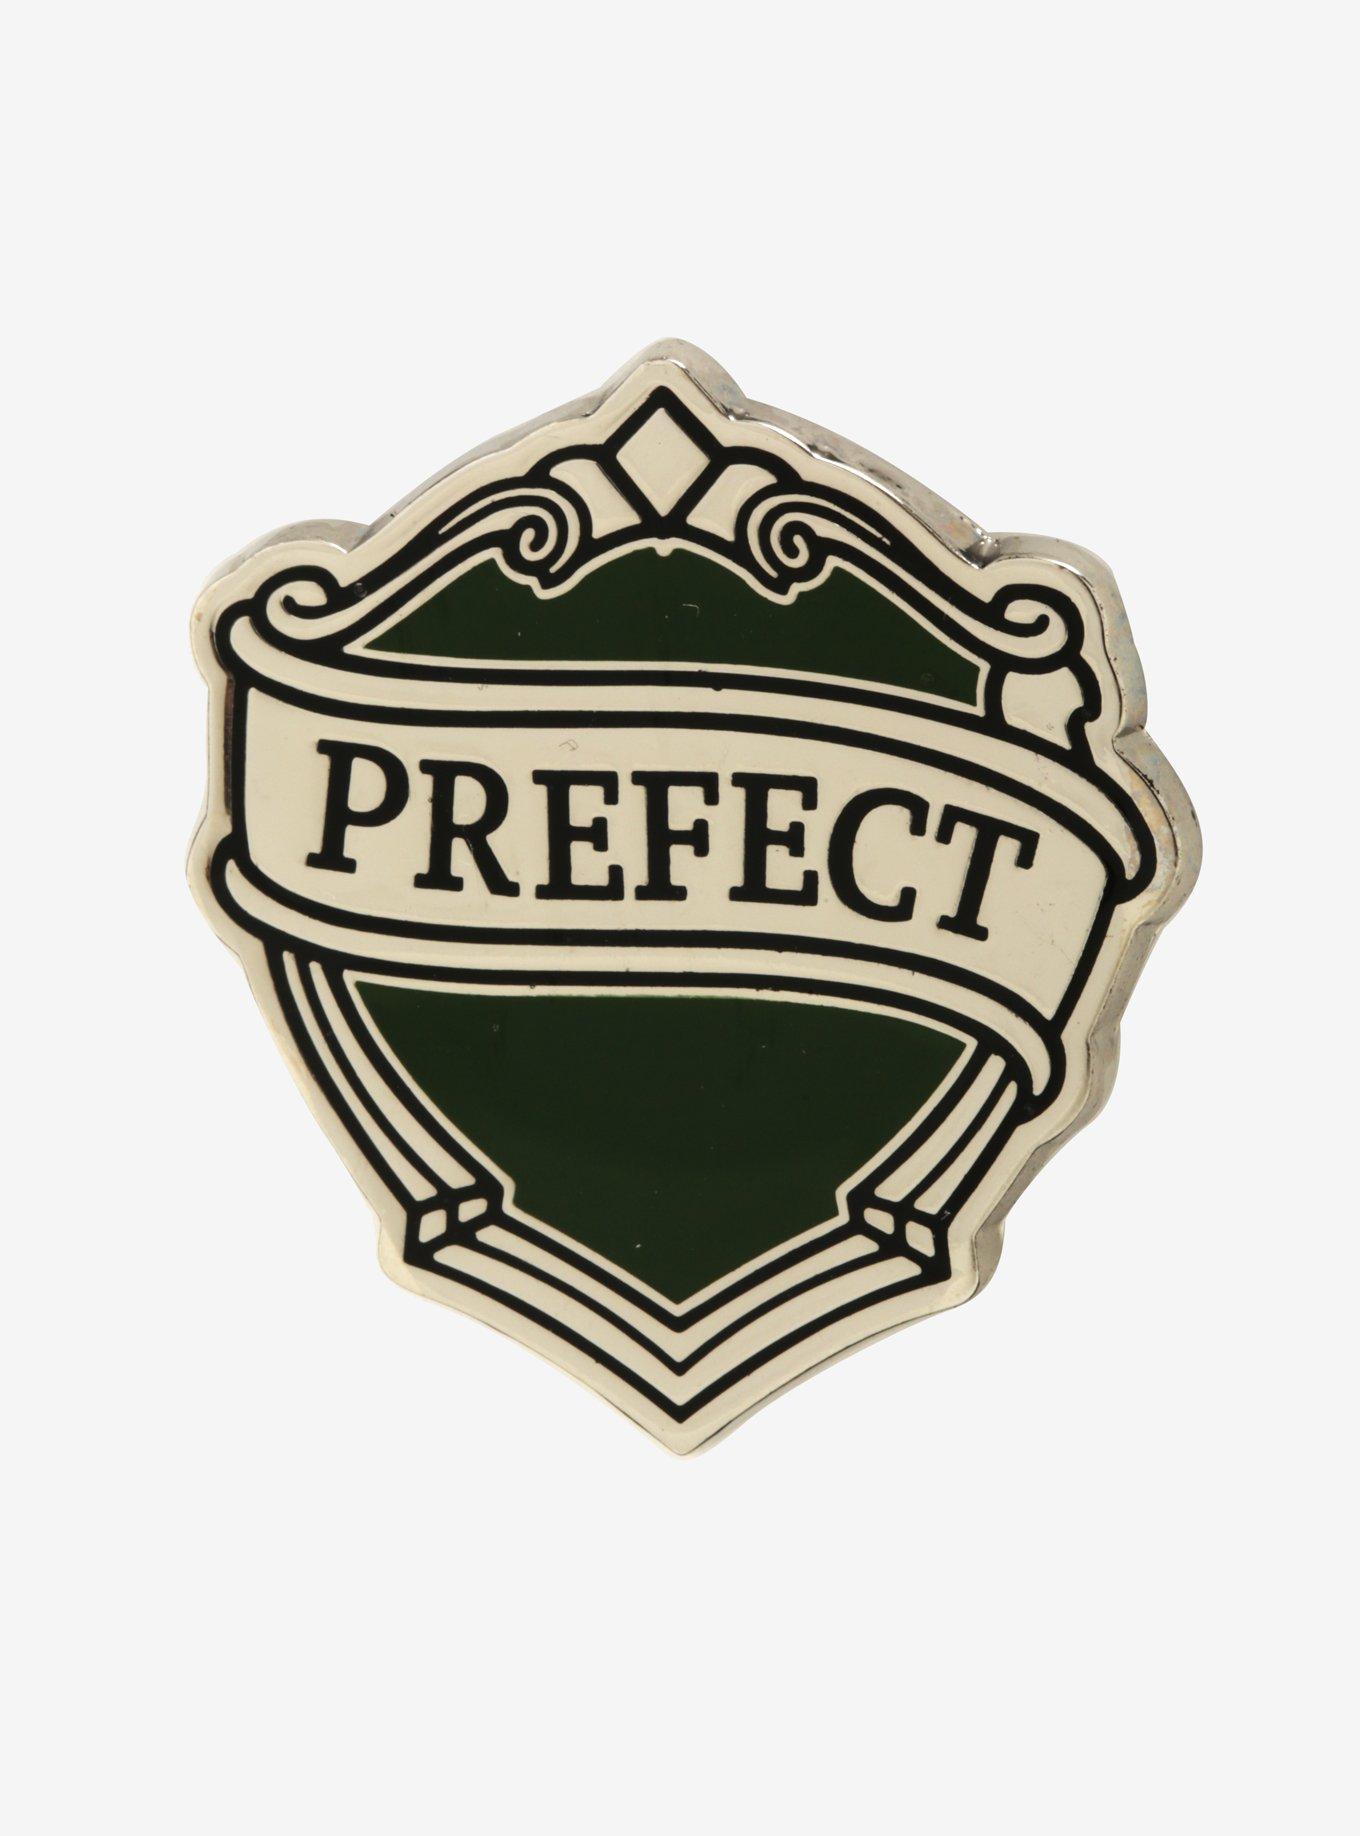 Slytherin House Prefect Harry Potter Pin Badge